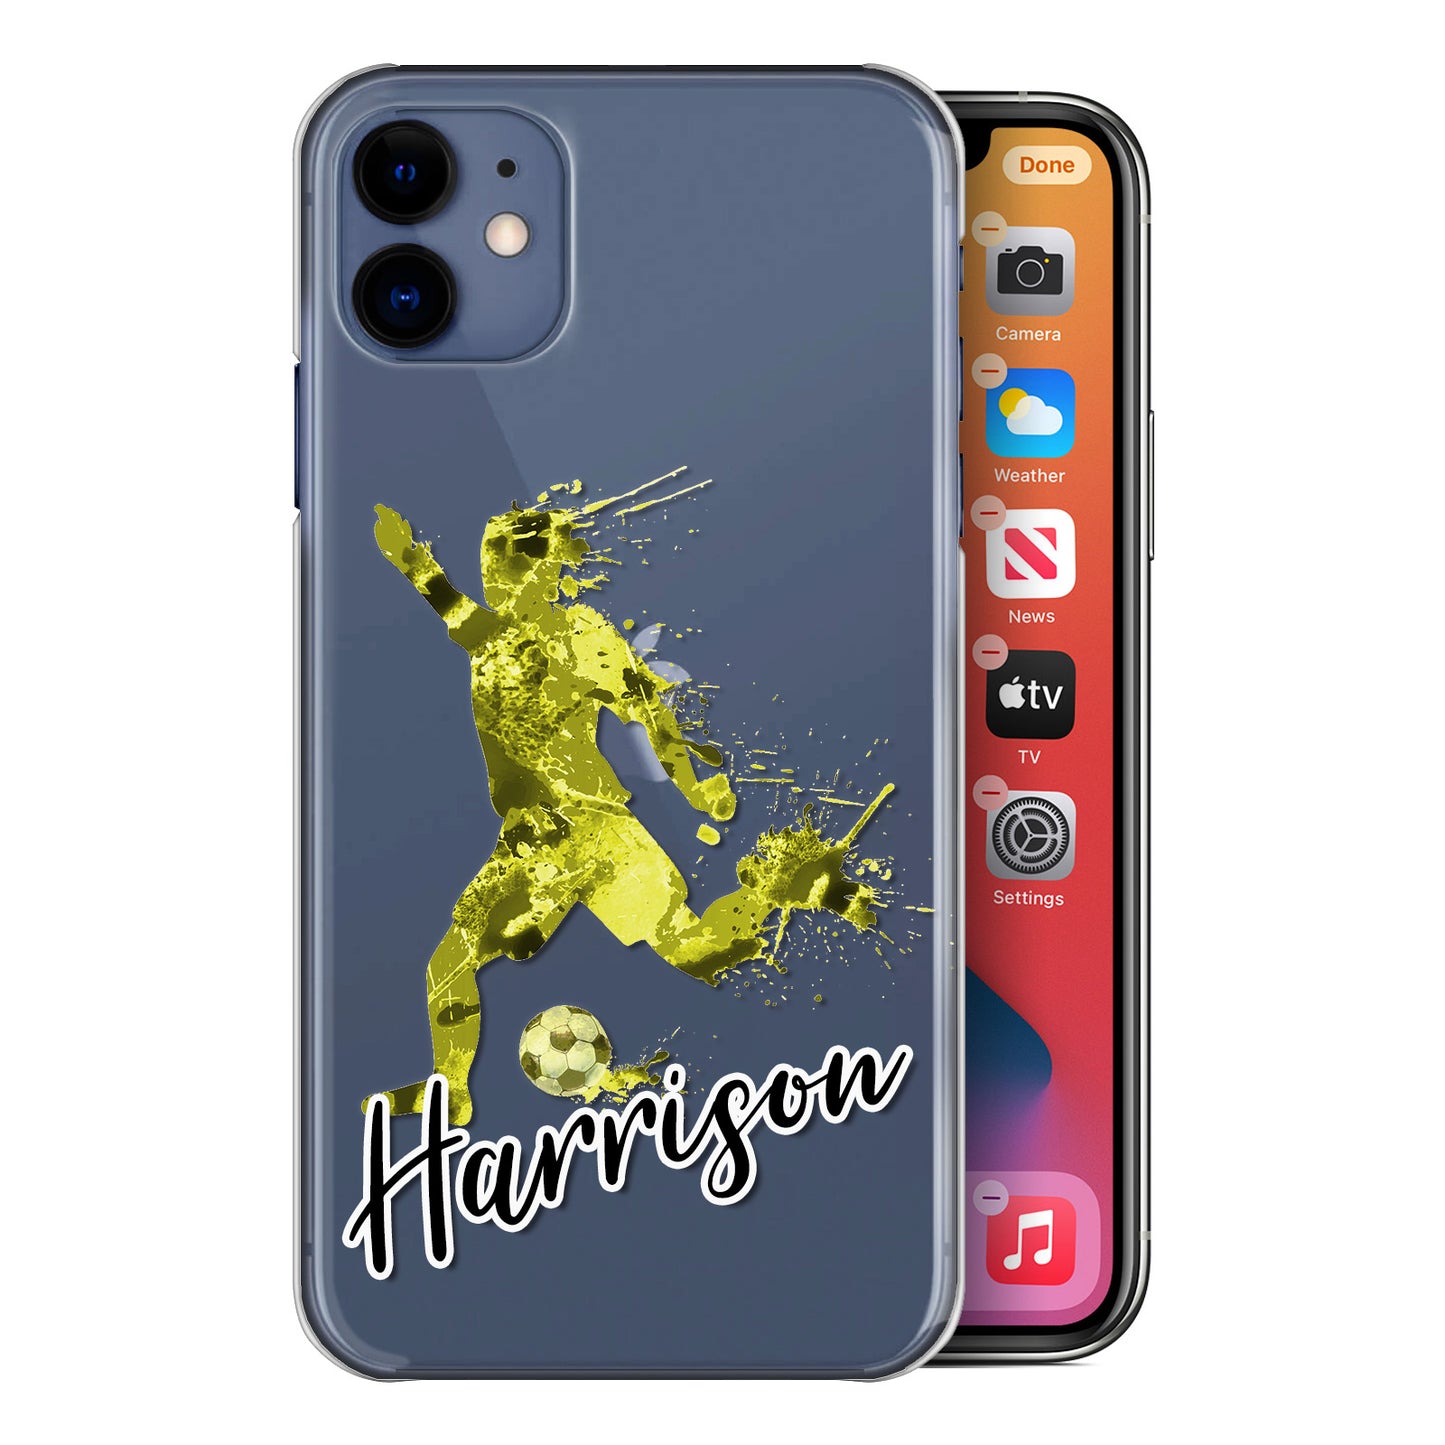 Personalised HTC Phone Hard Case - Zesty Yellow Football Star with White Outlined Text